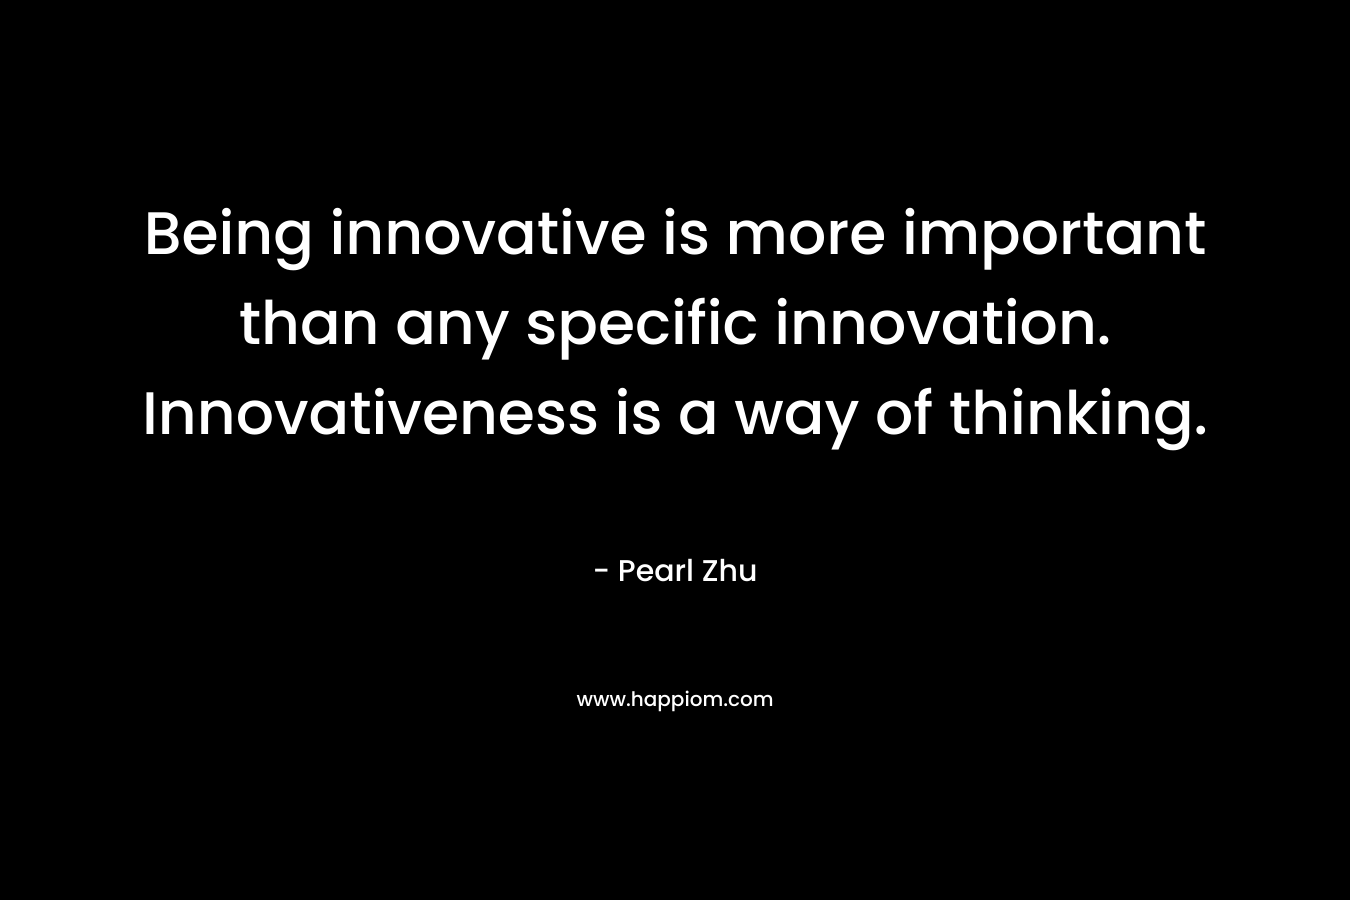 Being innovative is more important than any specific innovation. Innovativeness is a way of thinking.